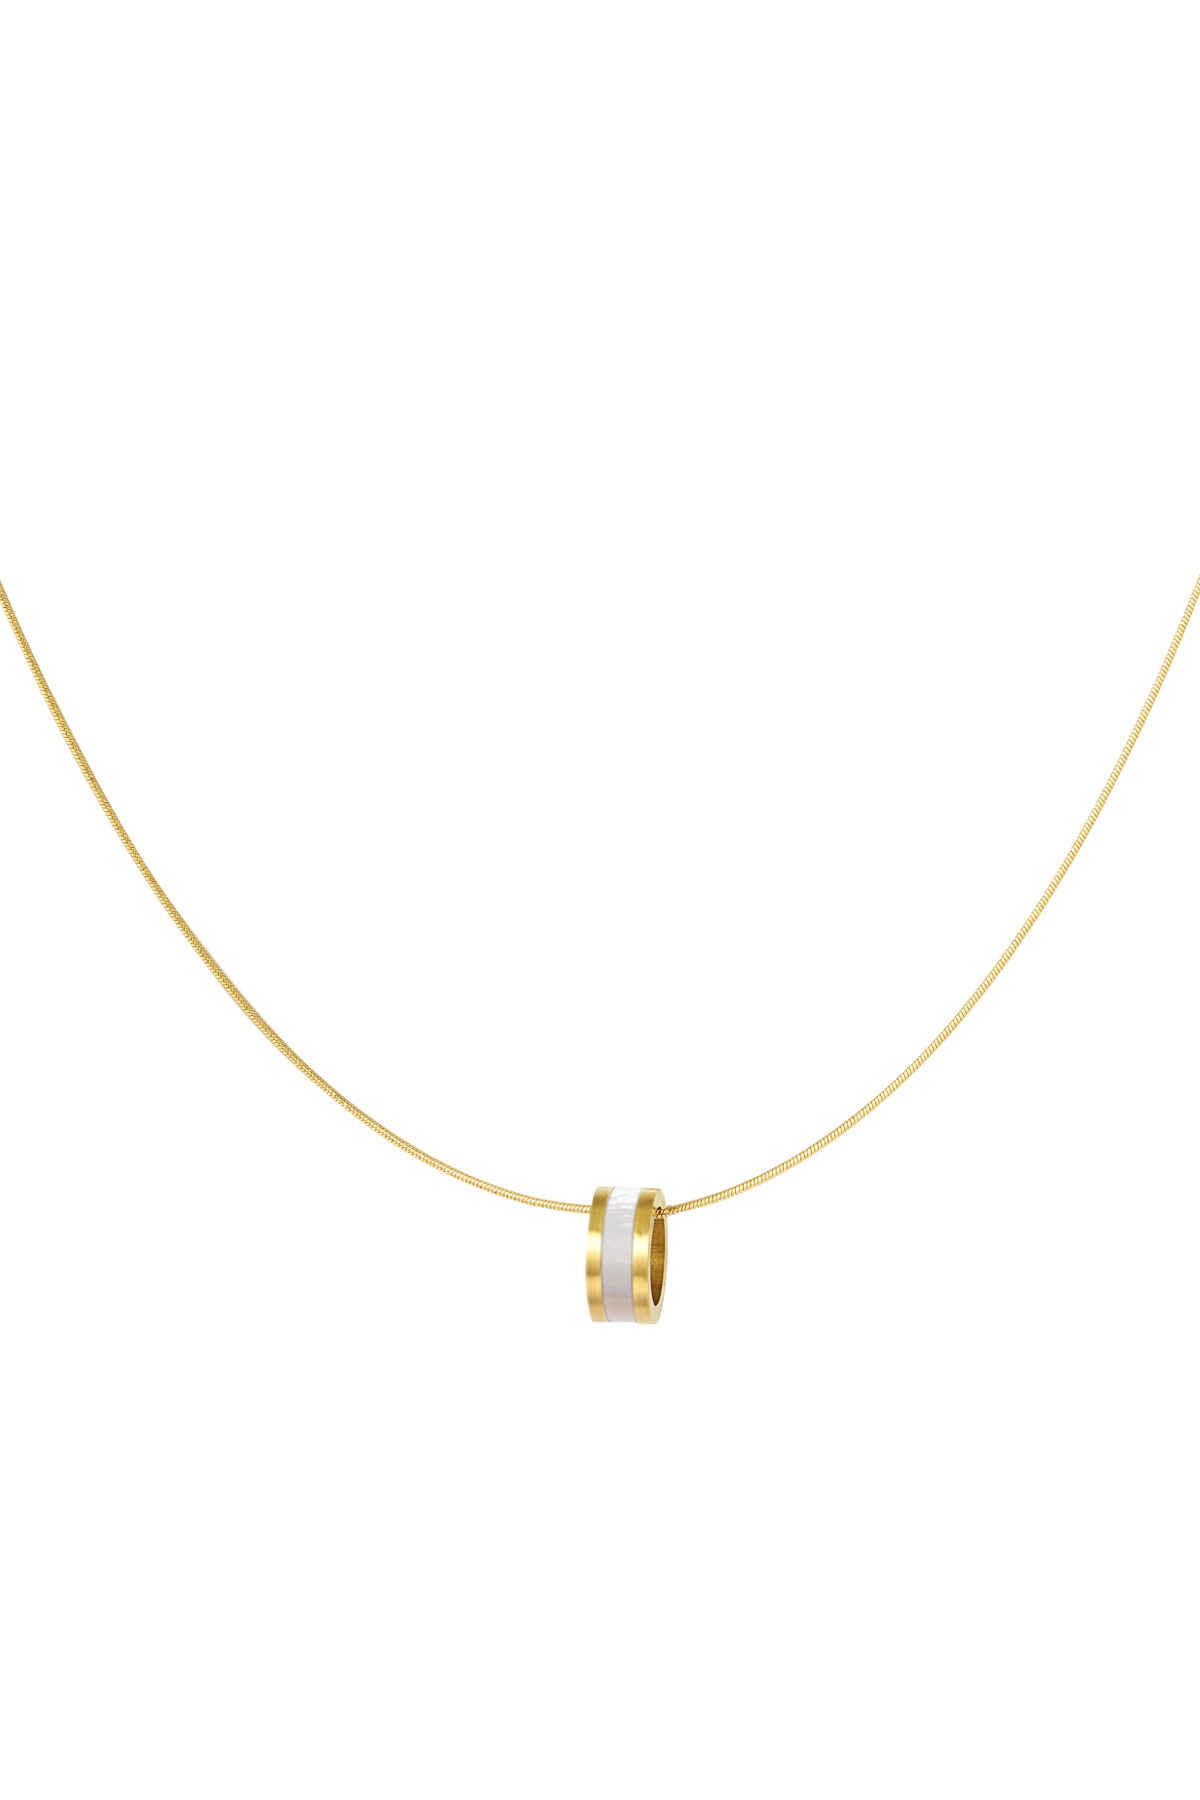 Necklace colored charm - gold/white h5 